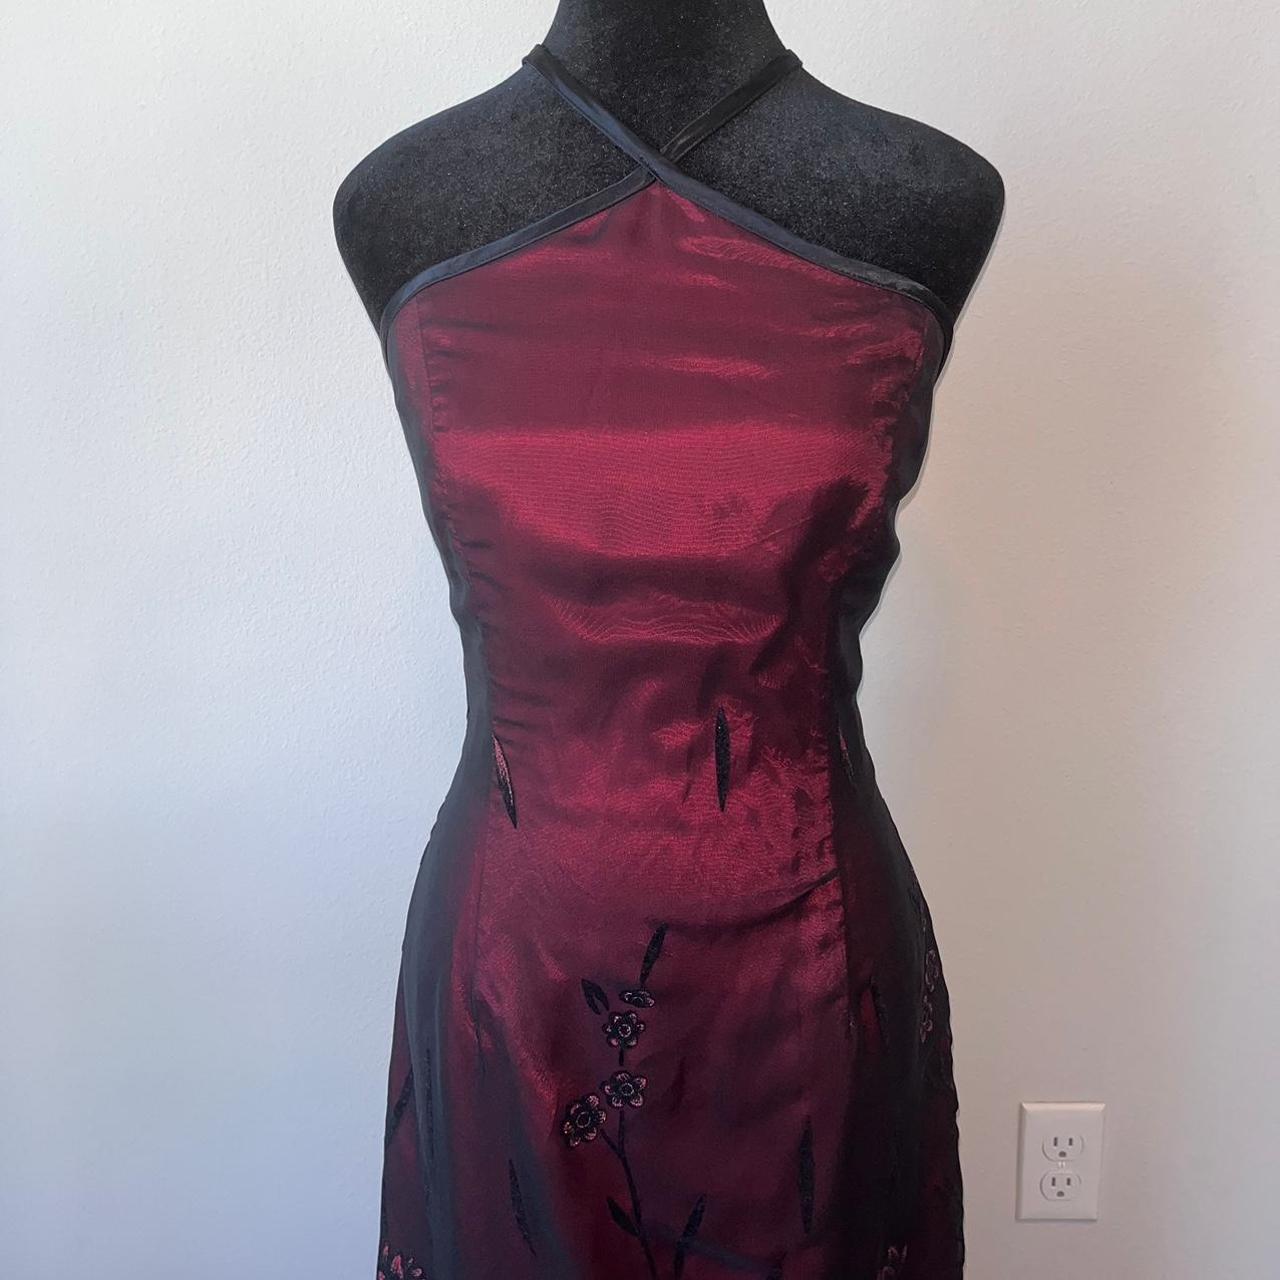 This dress? 90s vampy red dress with black mesh overlay of my